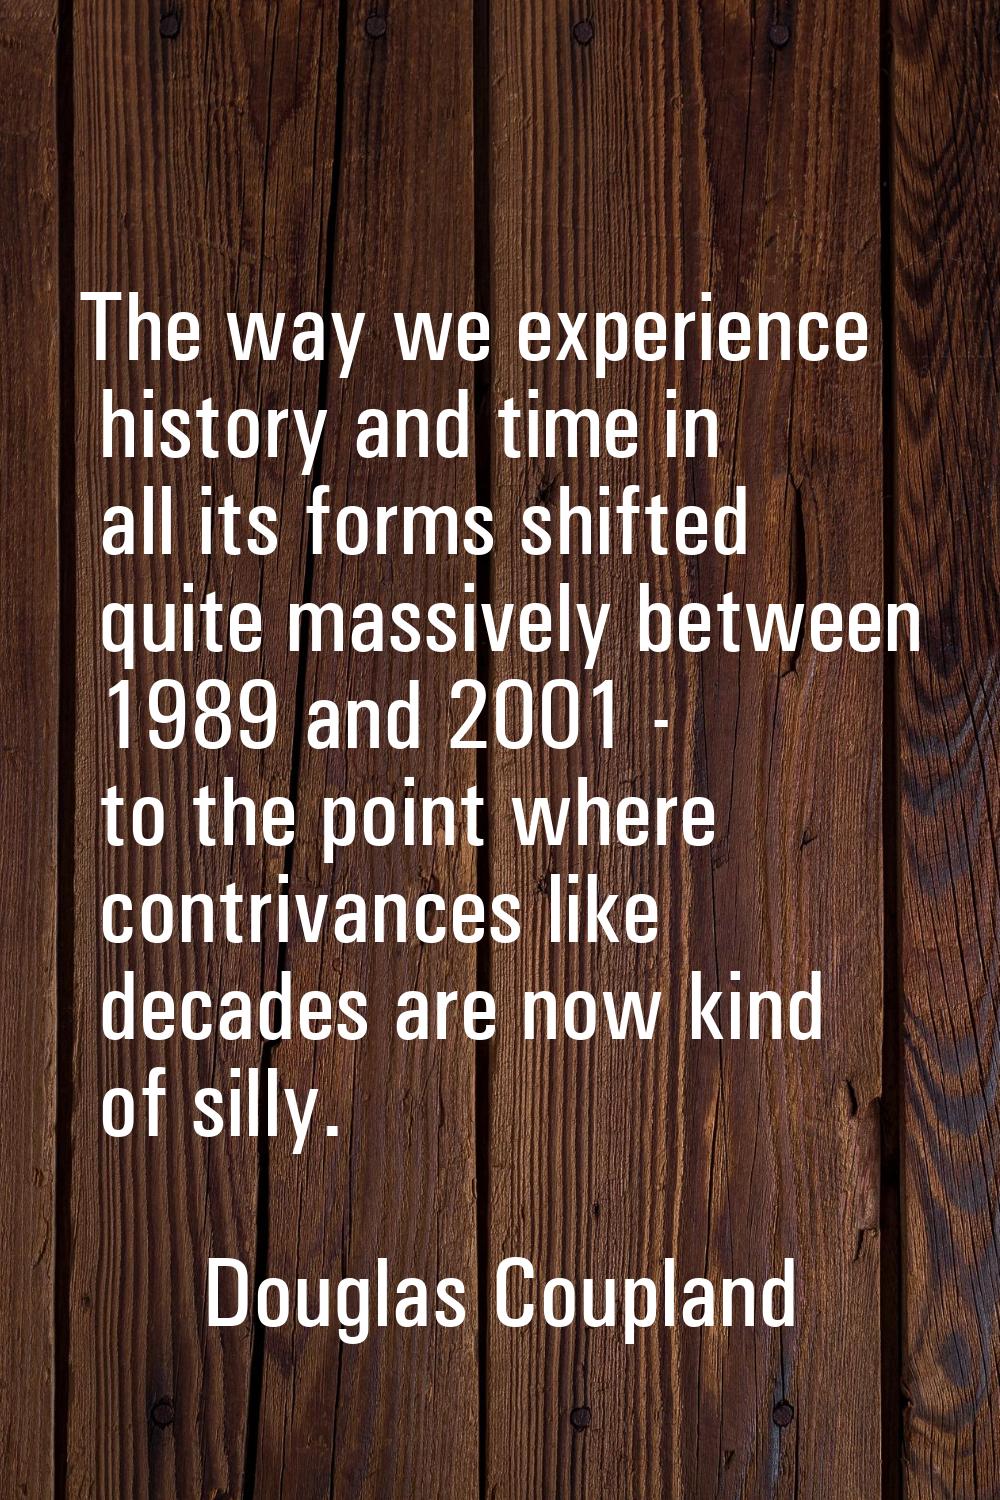 The way we experience history and time in all its forms shifted quite massively between 1989 and 20